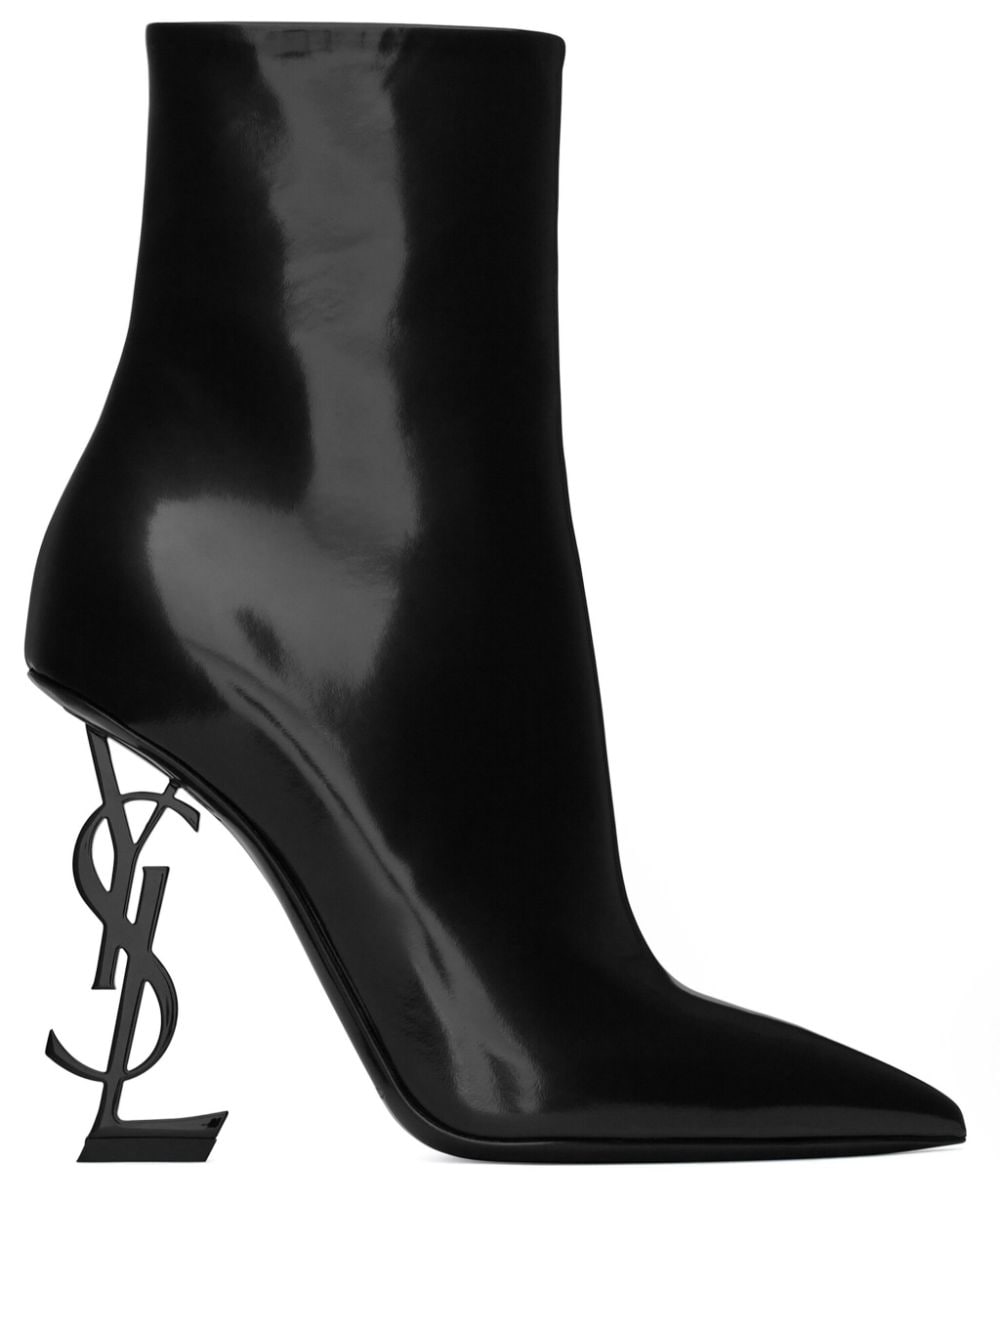 SAINT LAURENT Stunning Black Leather Ankle Boots for Women - High Sculpted Heel